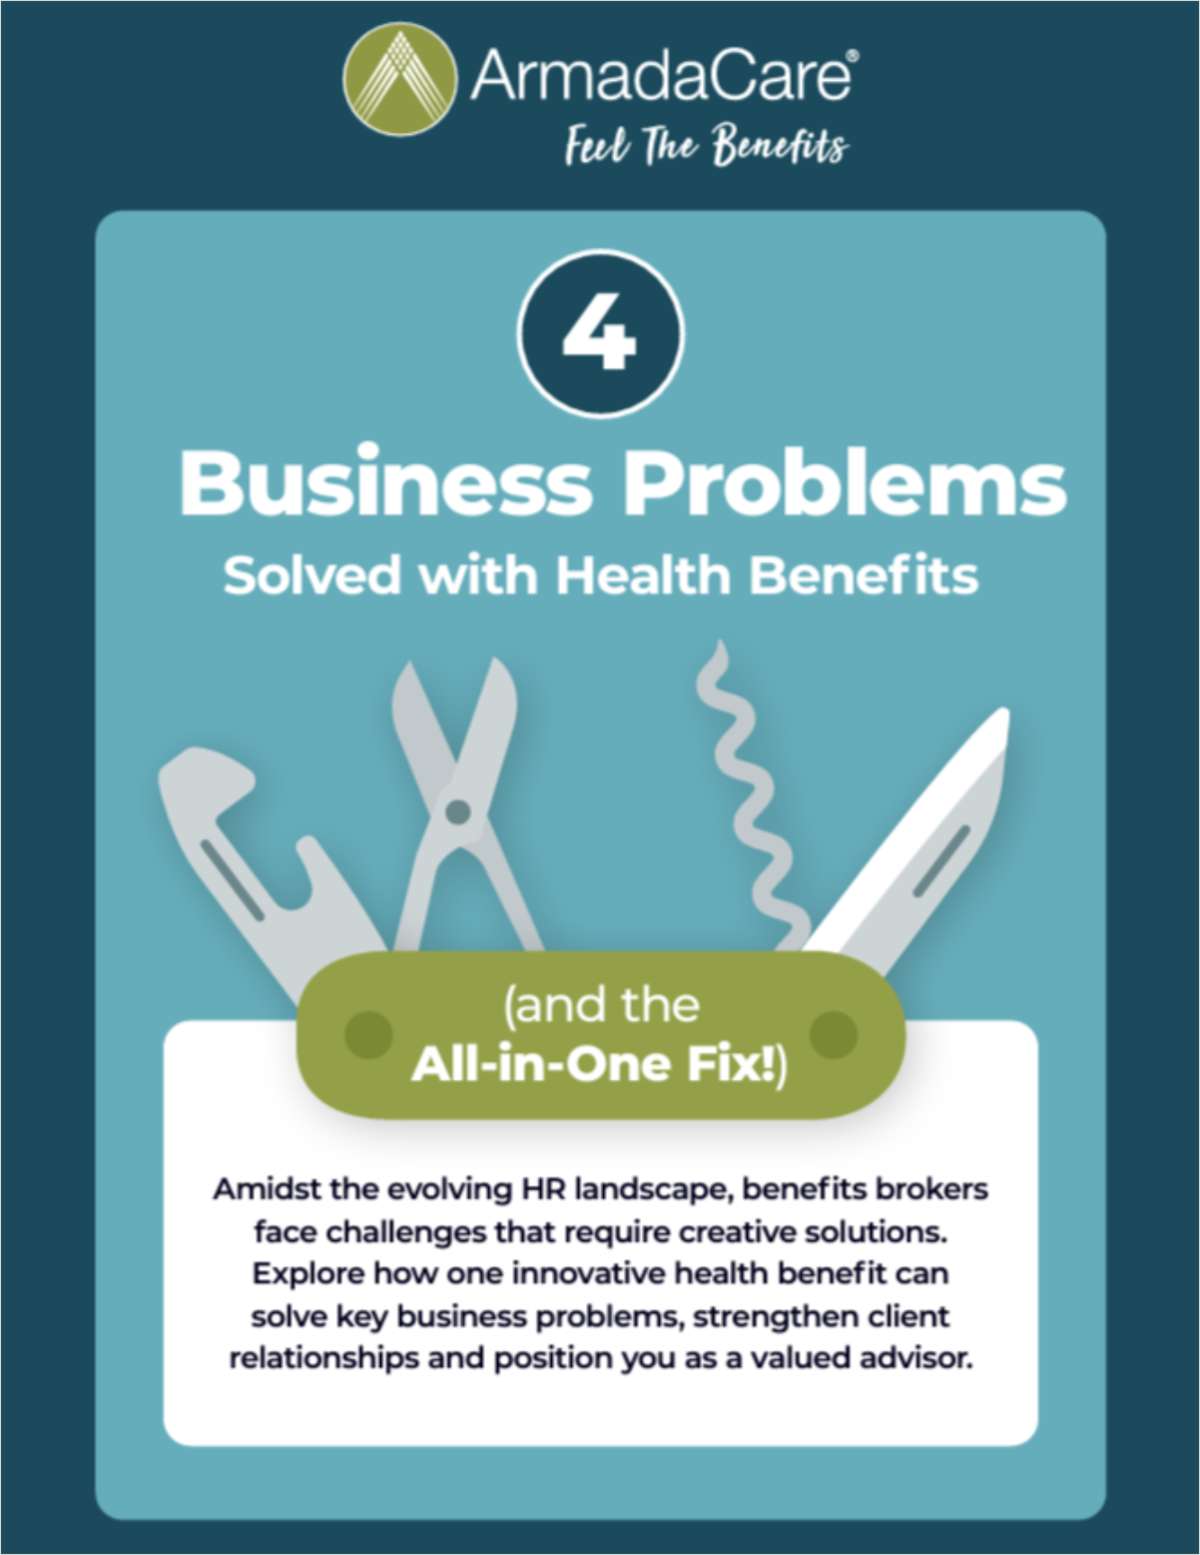 4 Business Problems Solved With Health Benefits link